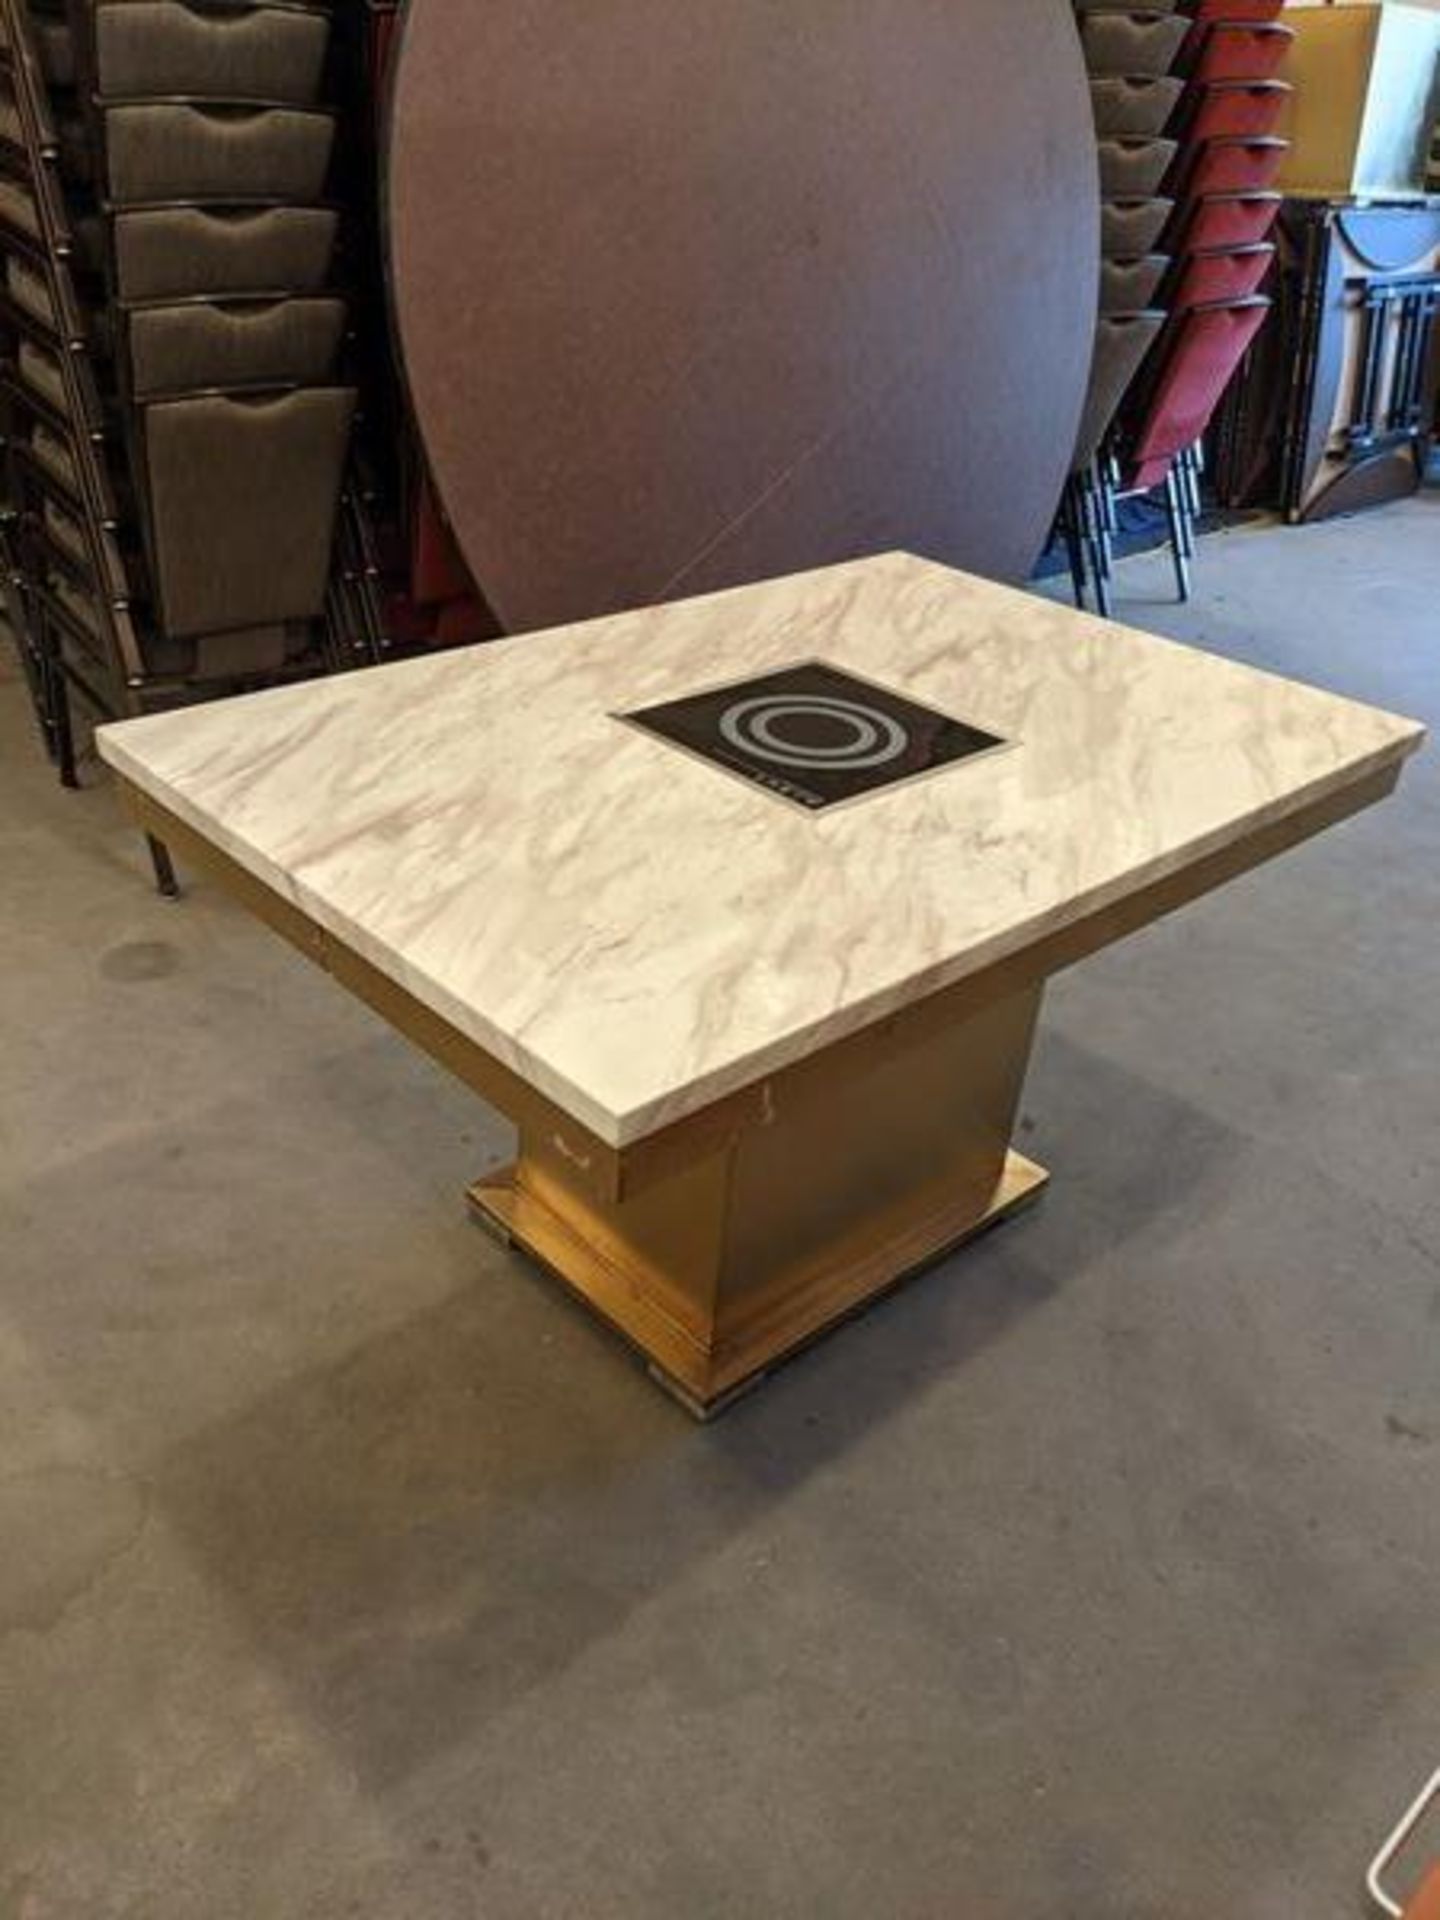 2 Approx. 54 x 35" Marble Top Tables with Induction Burner Drop In - Price each times 2